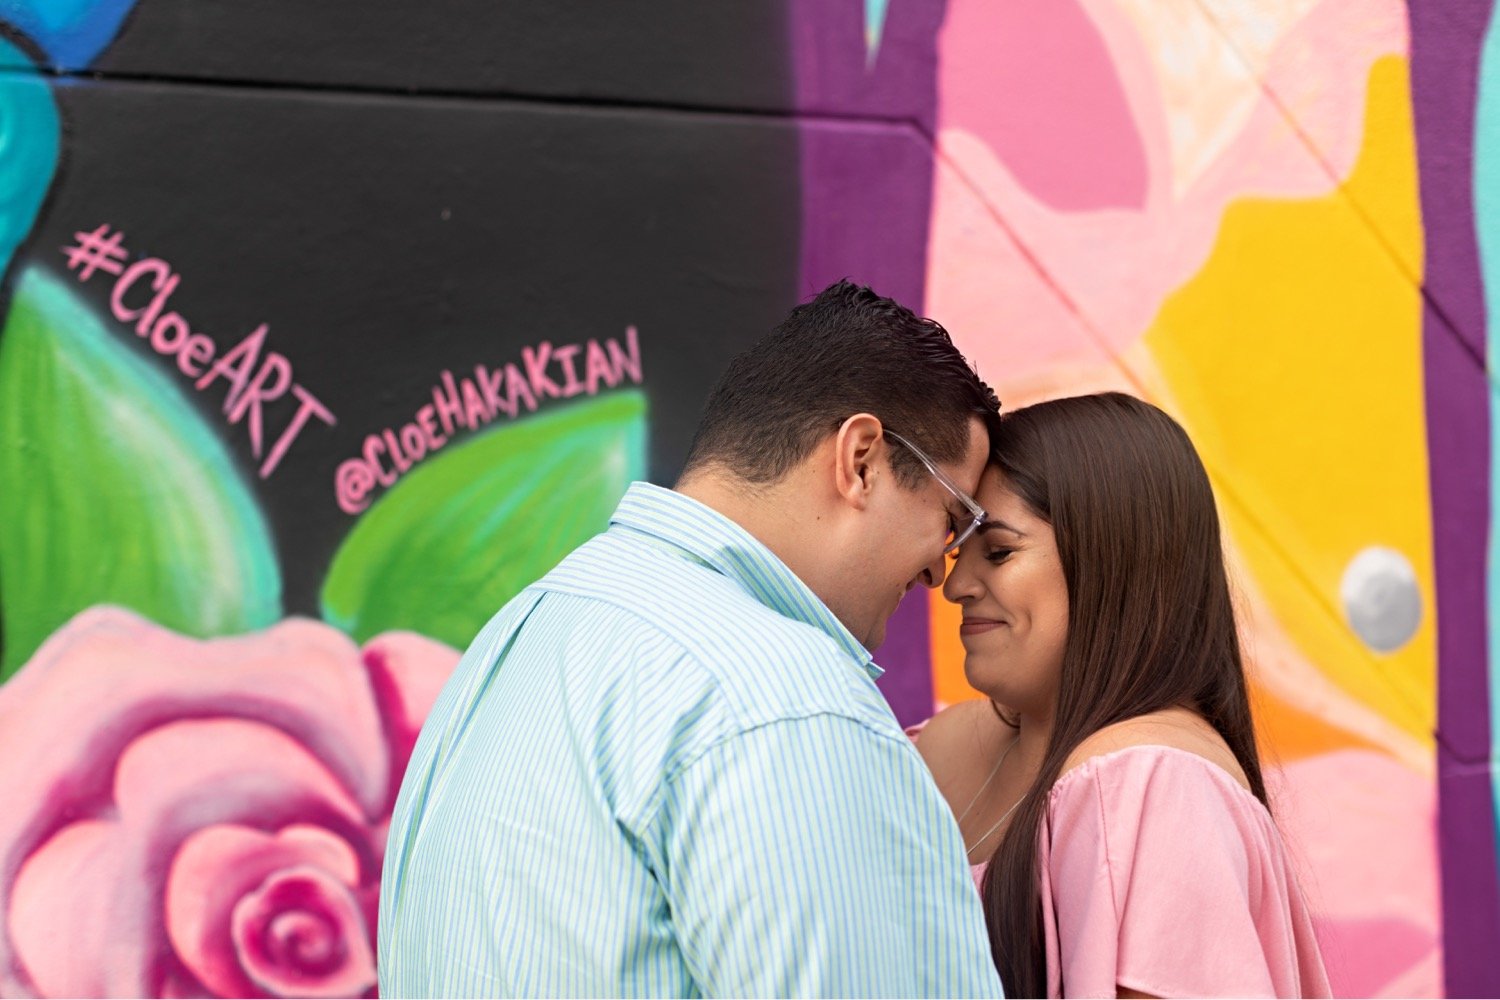 03_Wynwood-Walls-Engagement-Session-Miami-Engagement-Photographer_6408 1_posing_during_couple_in_walls_engagement_wynwood_hispanic_a_session_Mural_thier_of_front_Miami_photographer.jpg